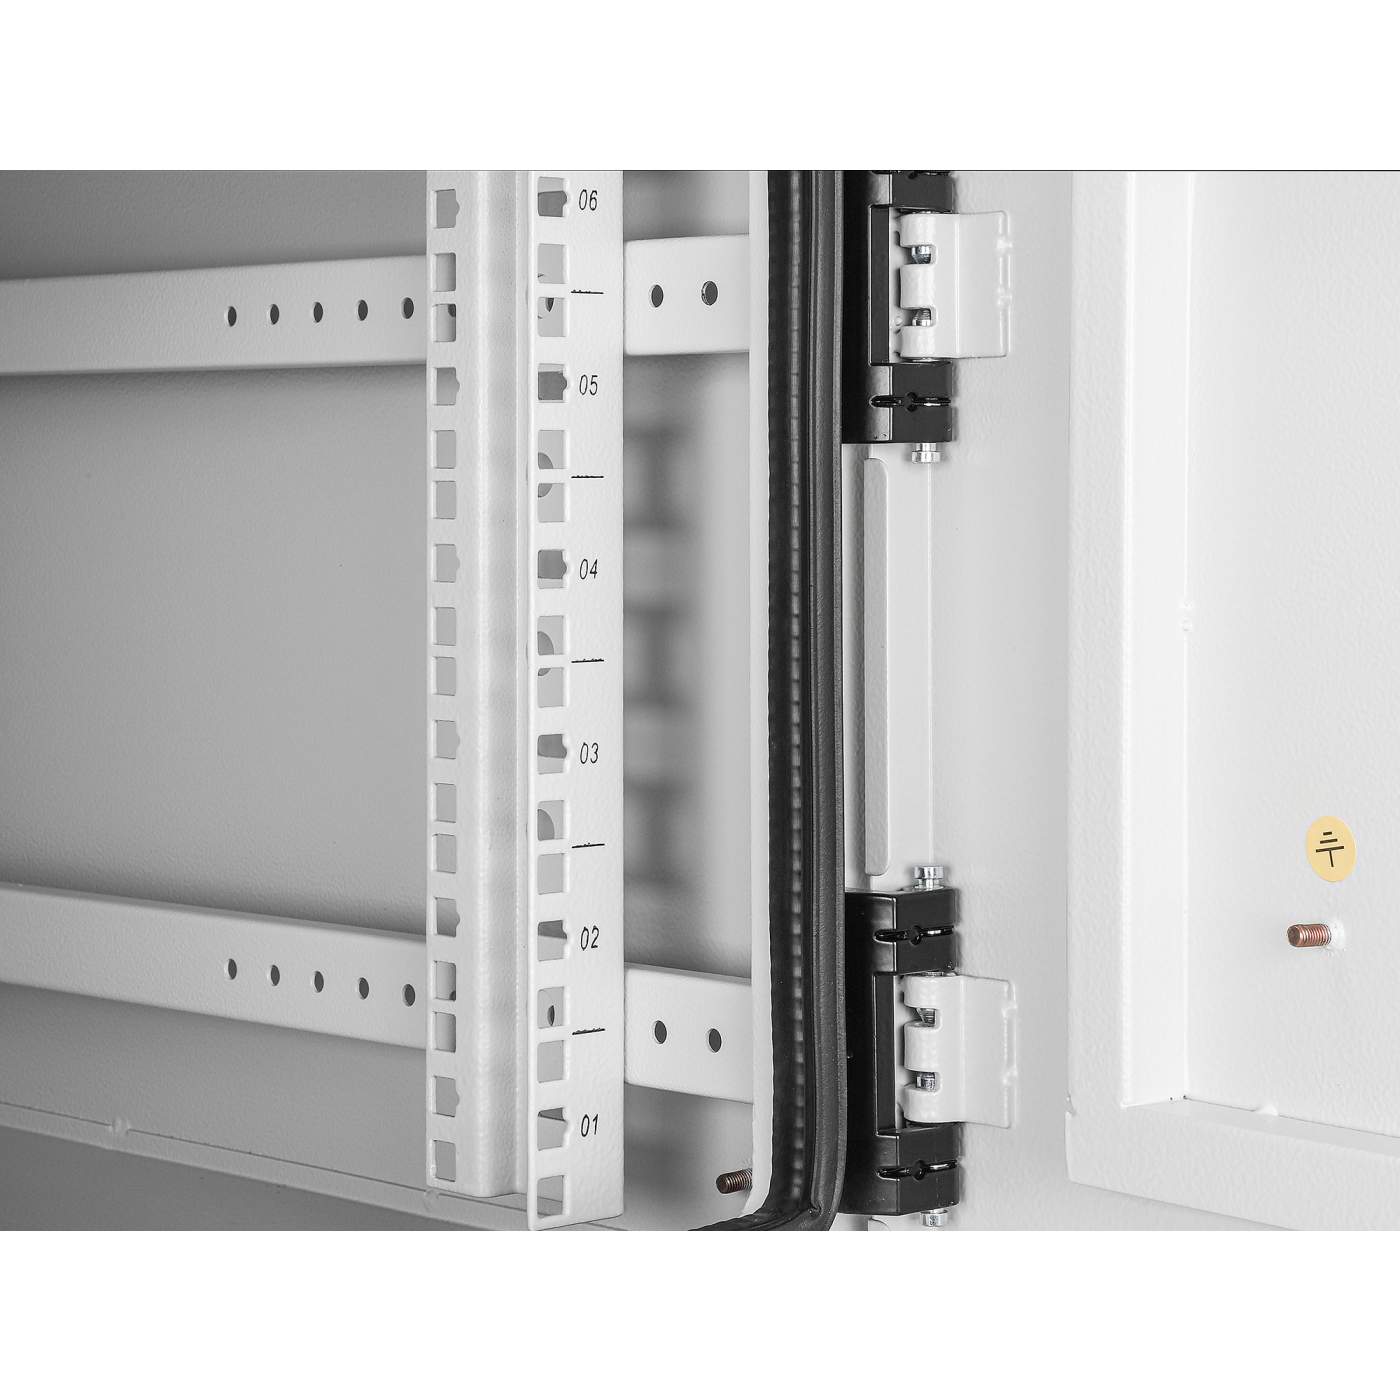 Industrial IP55 19" Wall Mount Cabinet with Integrated Fans, 6U  Image 6